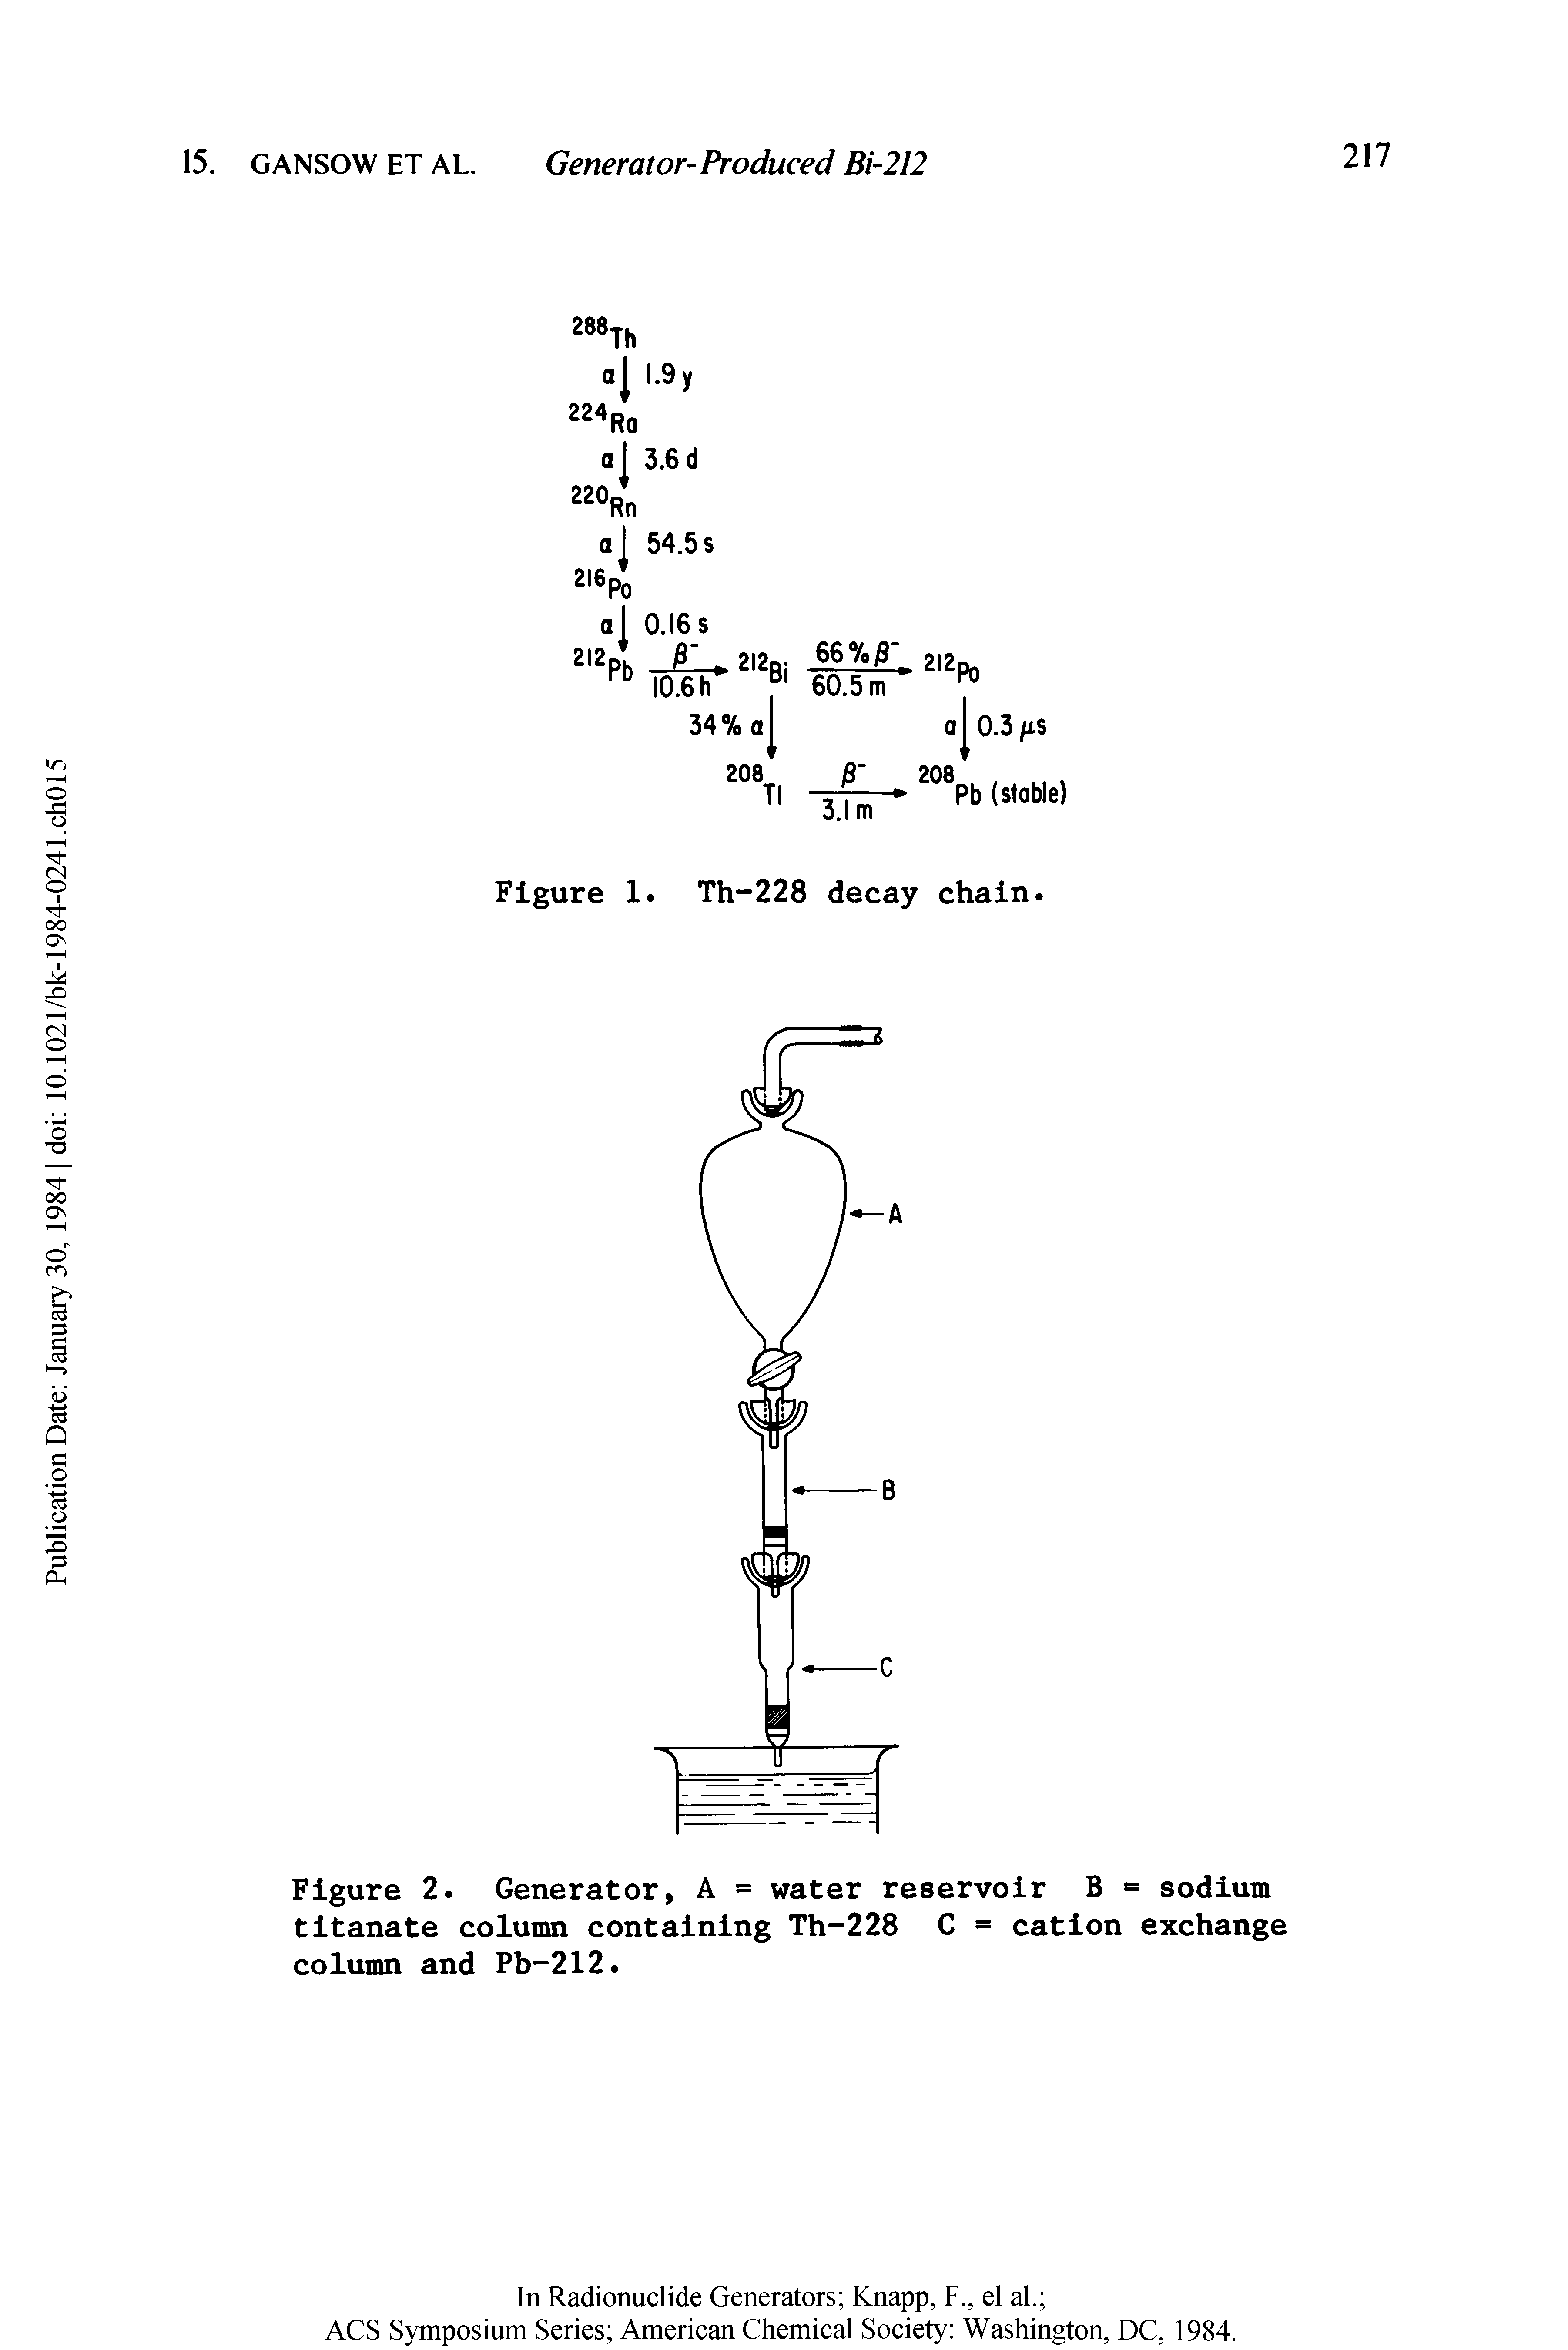 Figure 2. Generator, A = water reservoir sodium titanate column containing Th-228 C = cation exchange column and Pb-212.